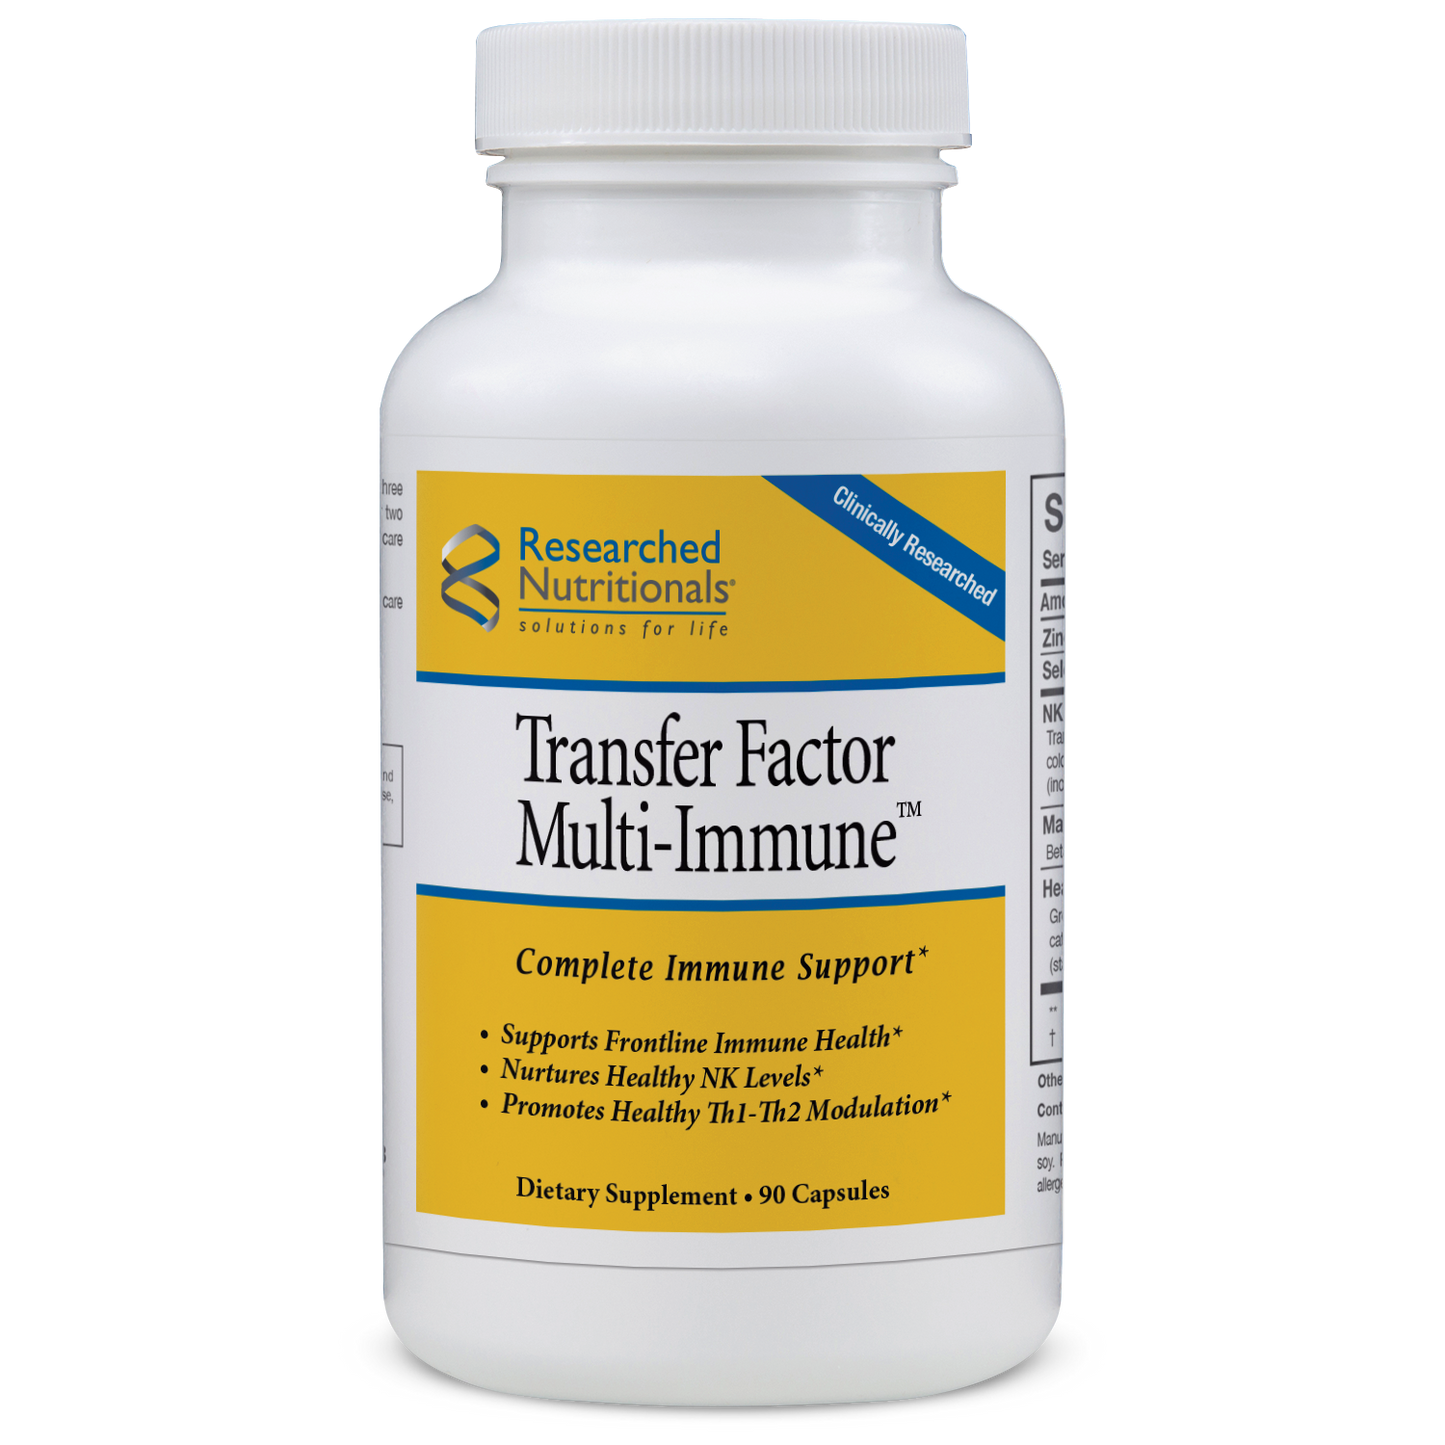 Researched Nutritionals - Transfer Factor Multi-Immune™ - 90ct